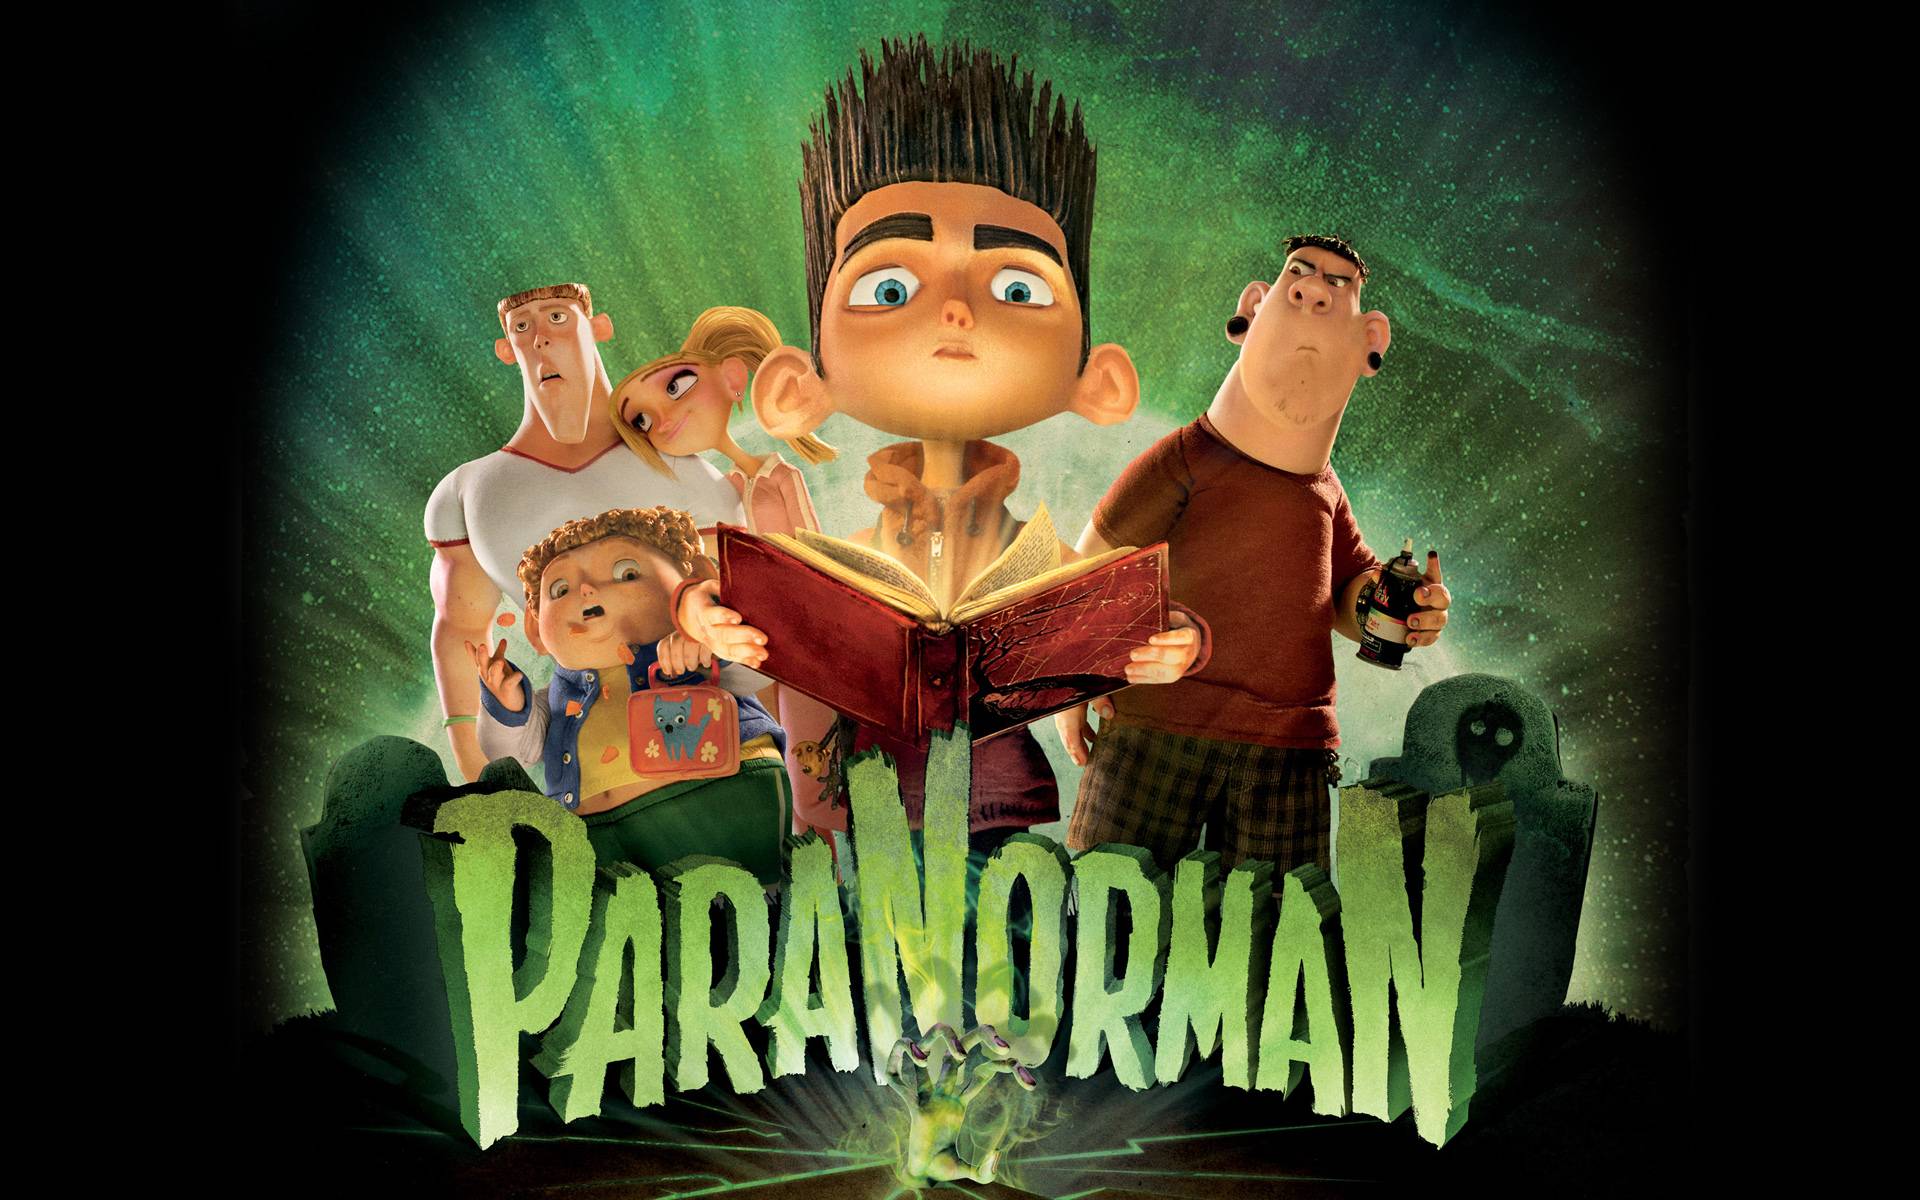 430030-stop-motion-animation-paranorman-wallpaper